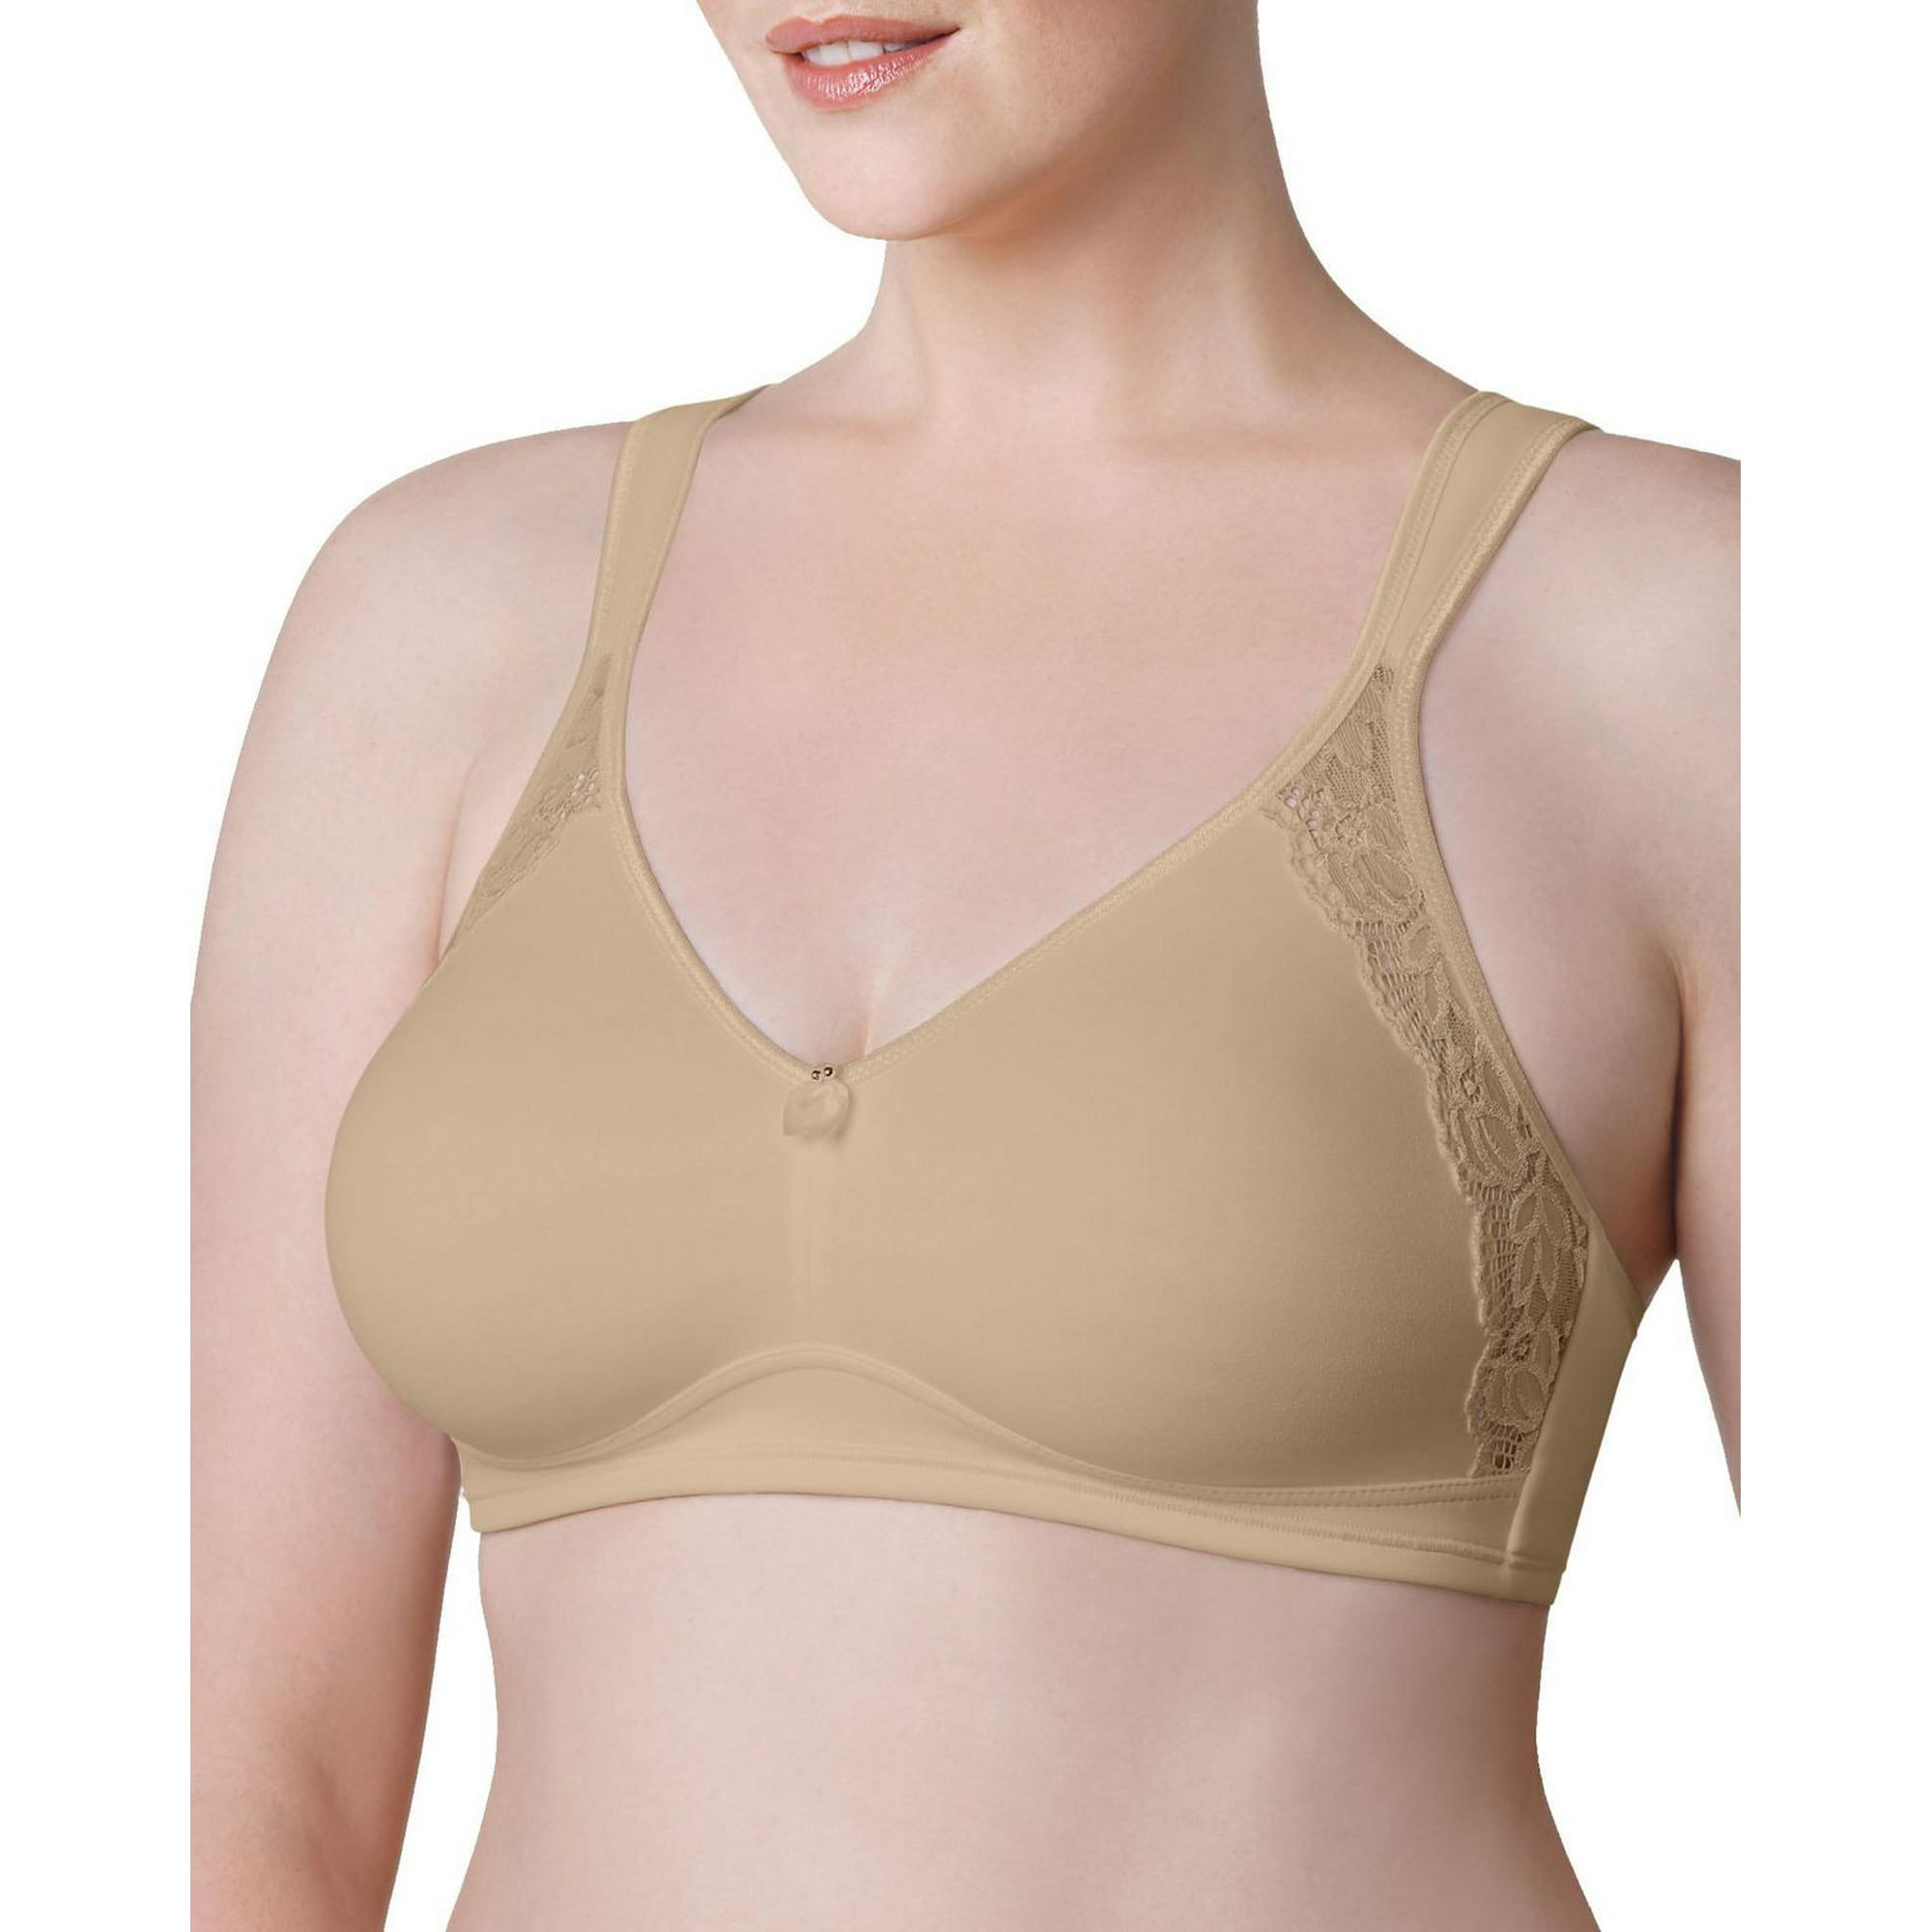 George Plus High Support Full Figure Seamless Unlined Underwire